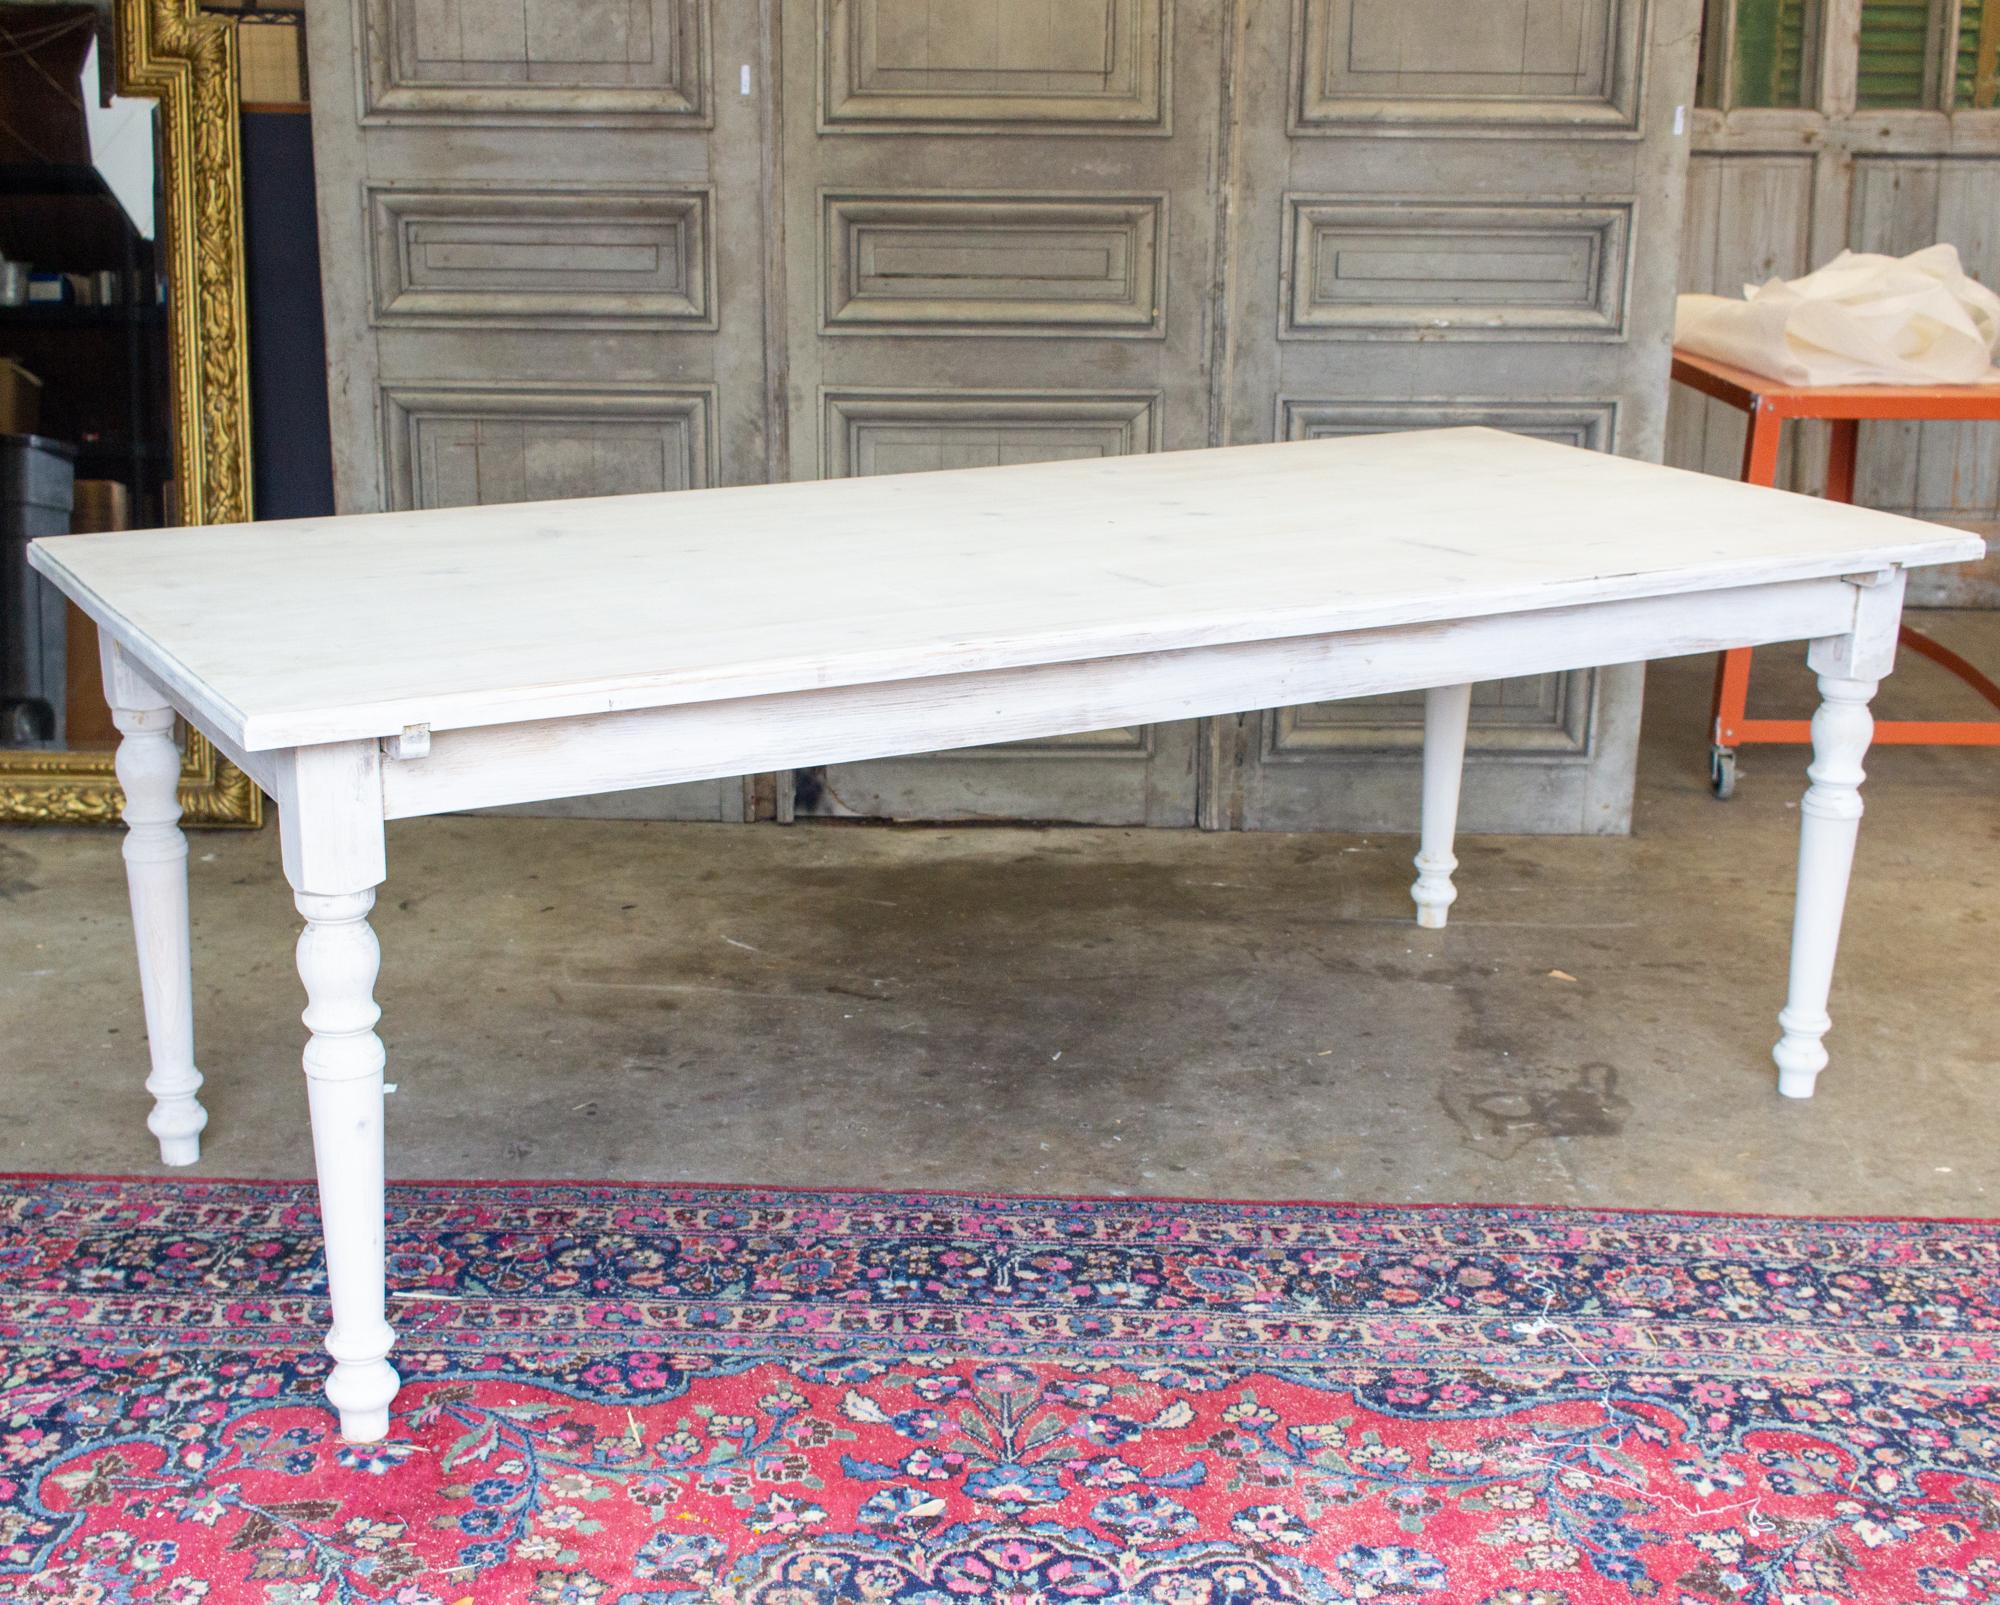 Large Pine Farm Table and Worktable with Drawer in Whitewash Painted Finish 13